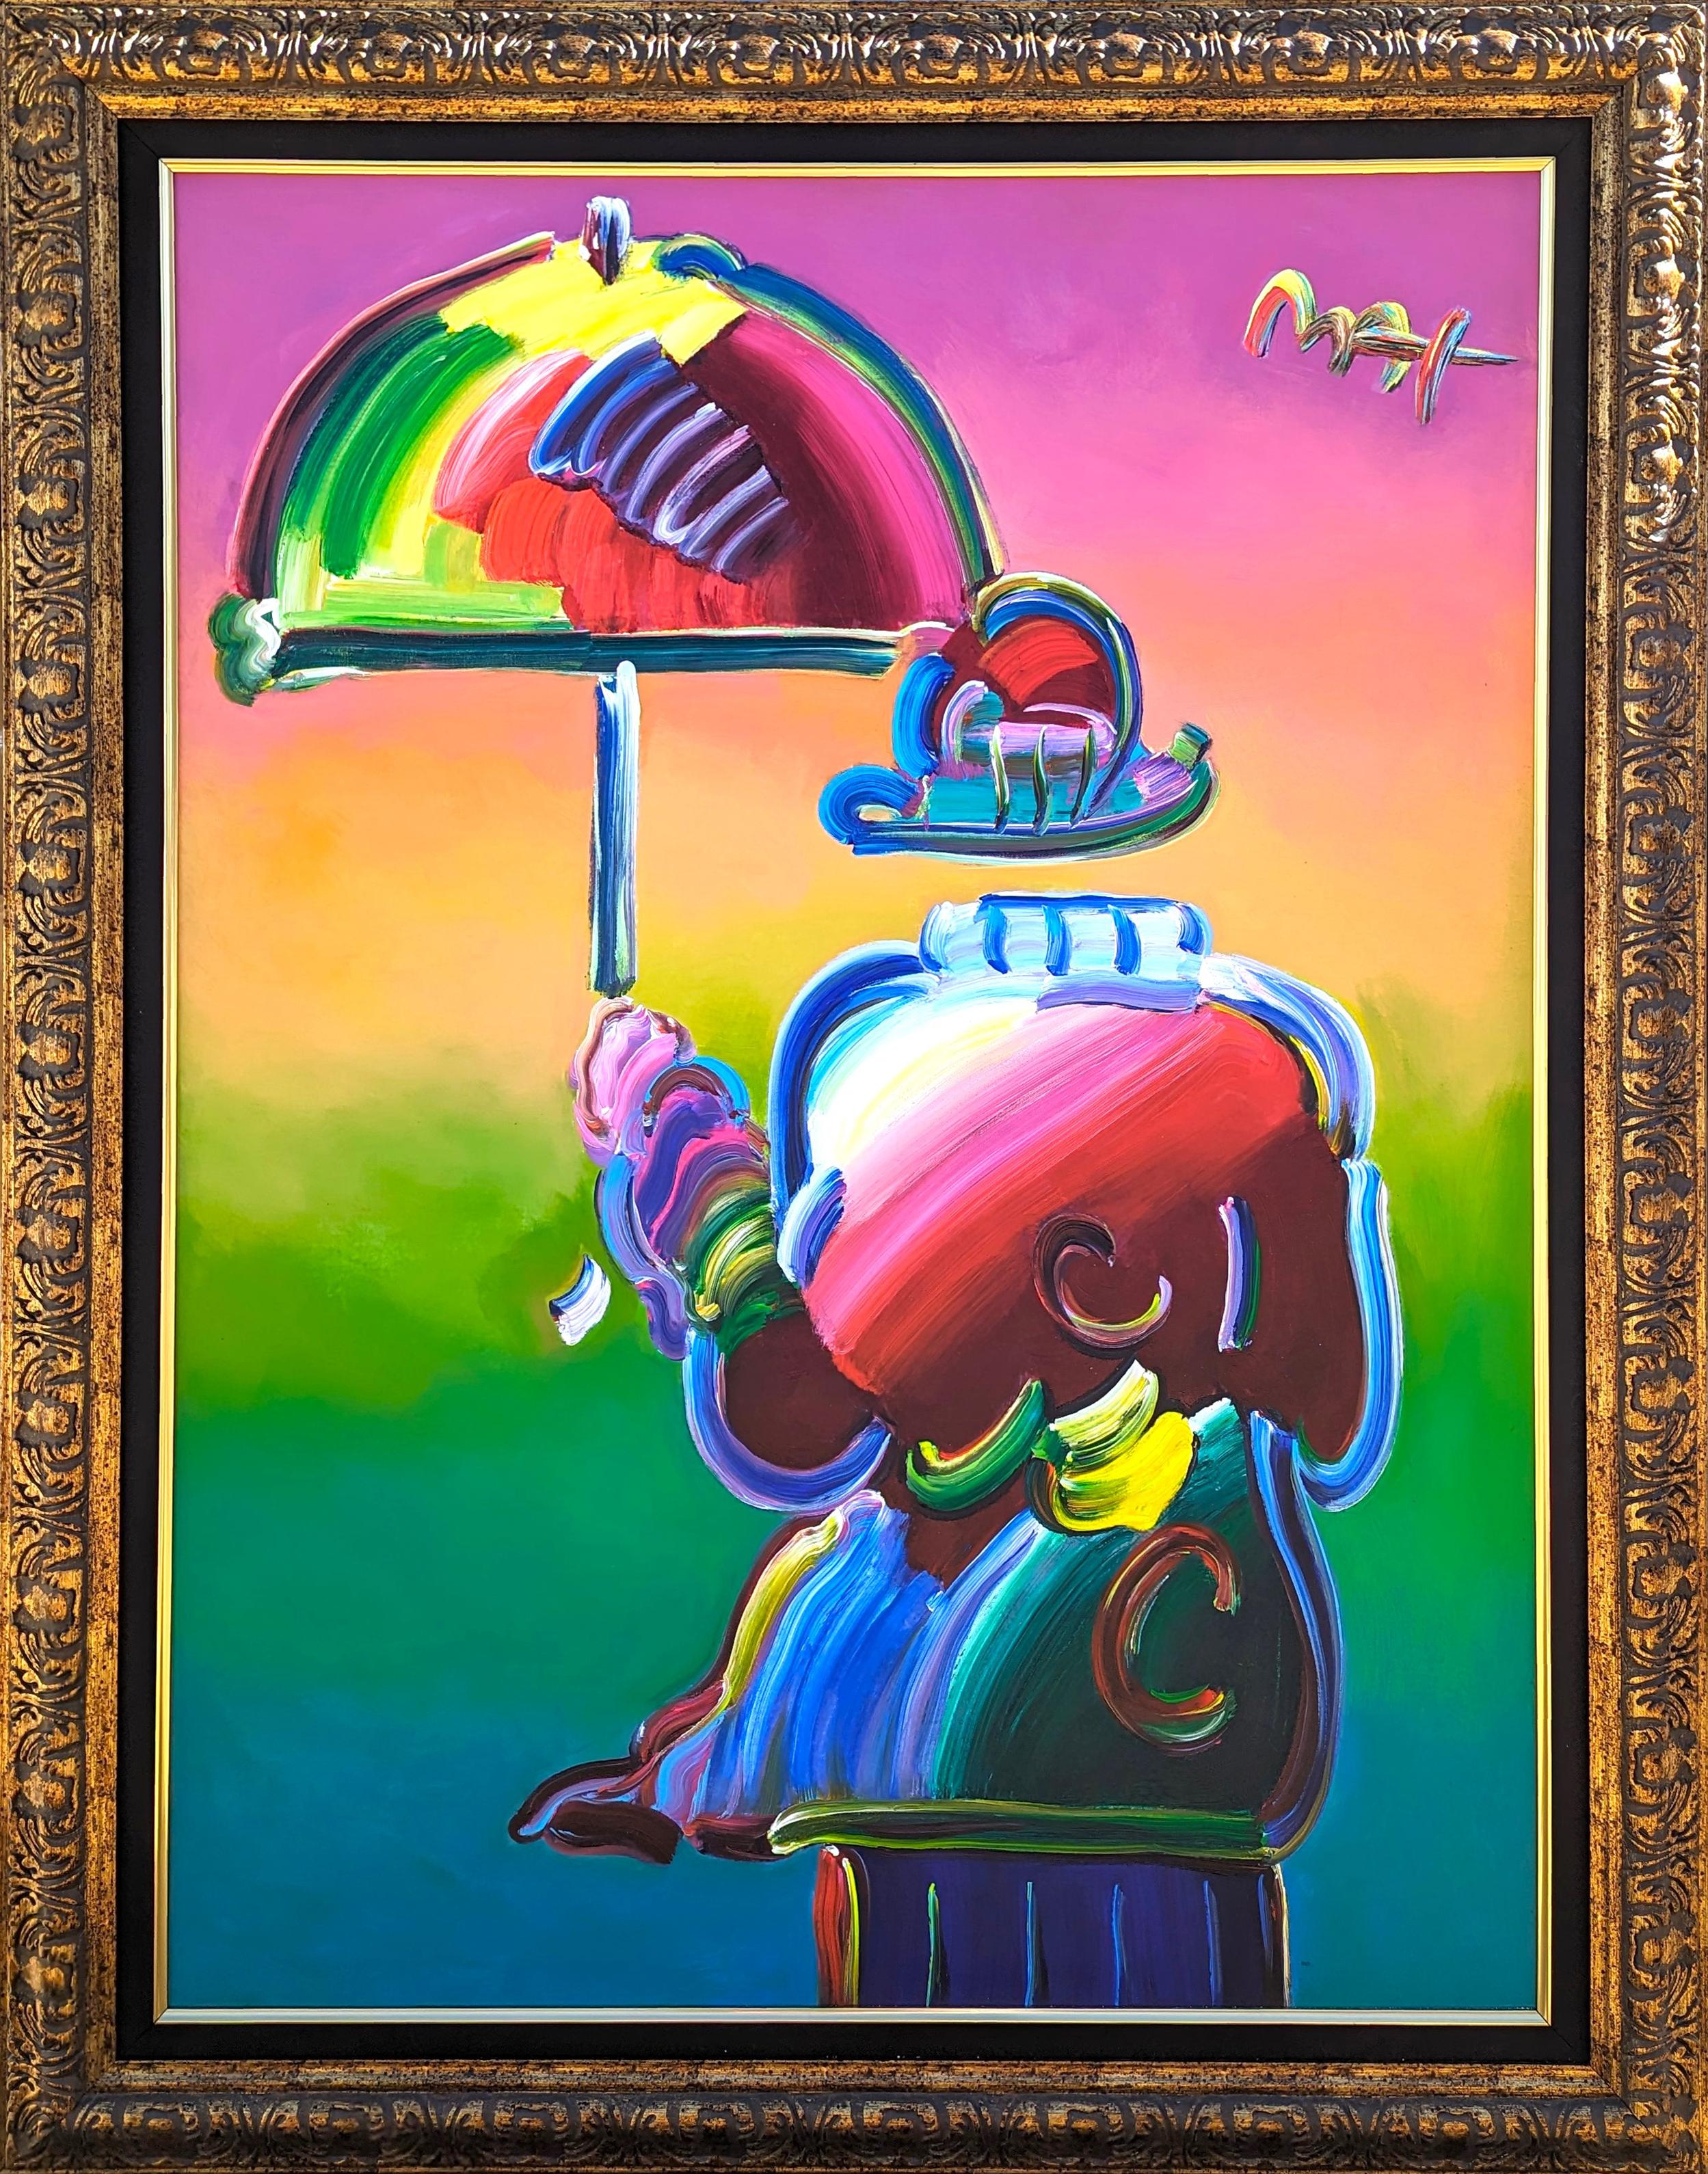 Peter Max Abstract Painting - “Umbrella Man IV Ver. 2” Colorful Contemporary Figurative Abstract Pop Painting